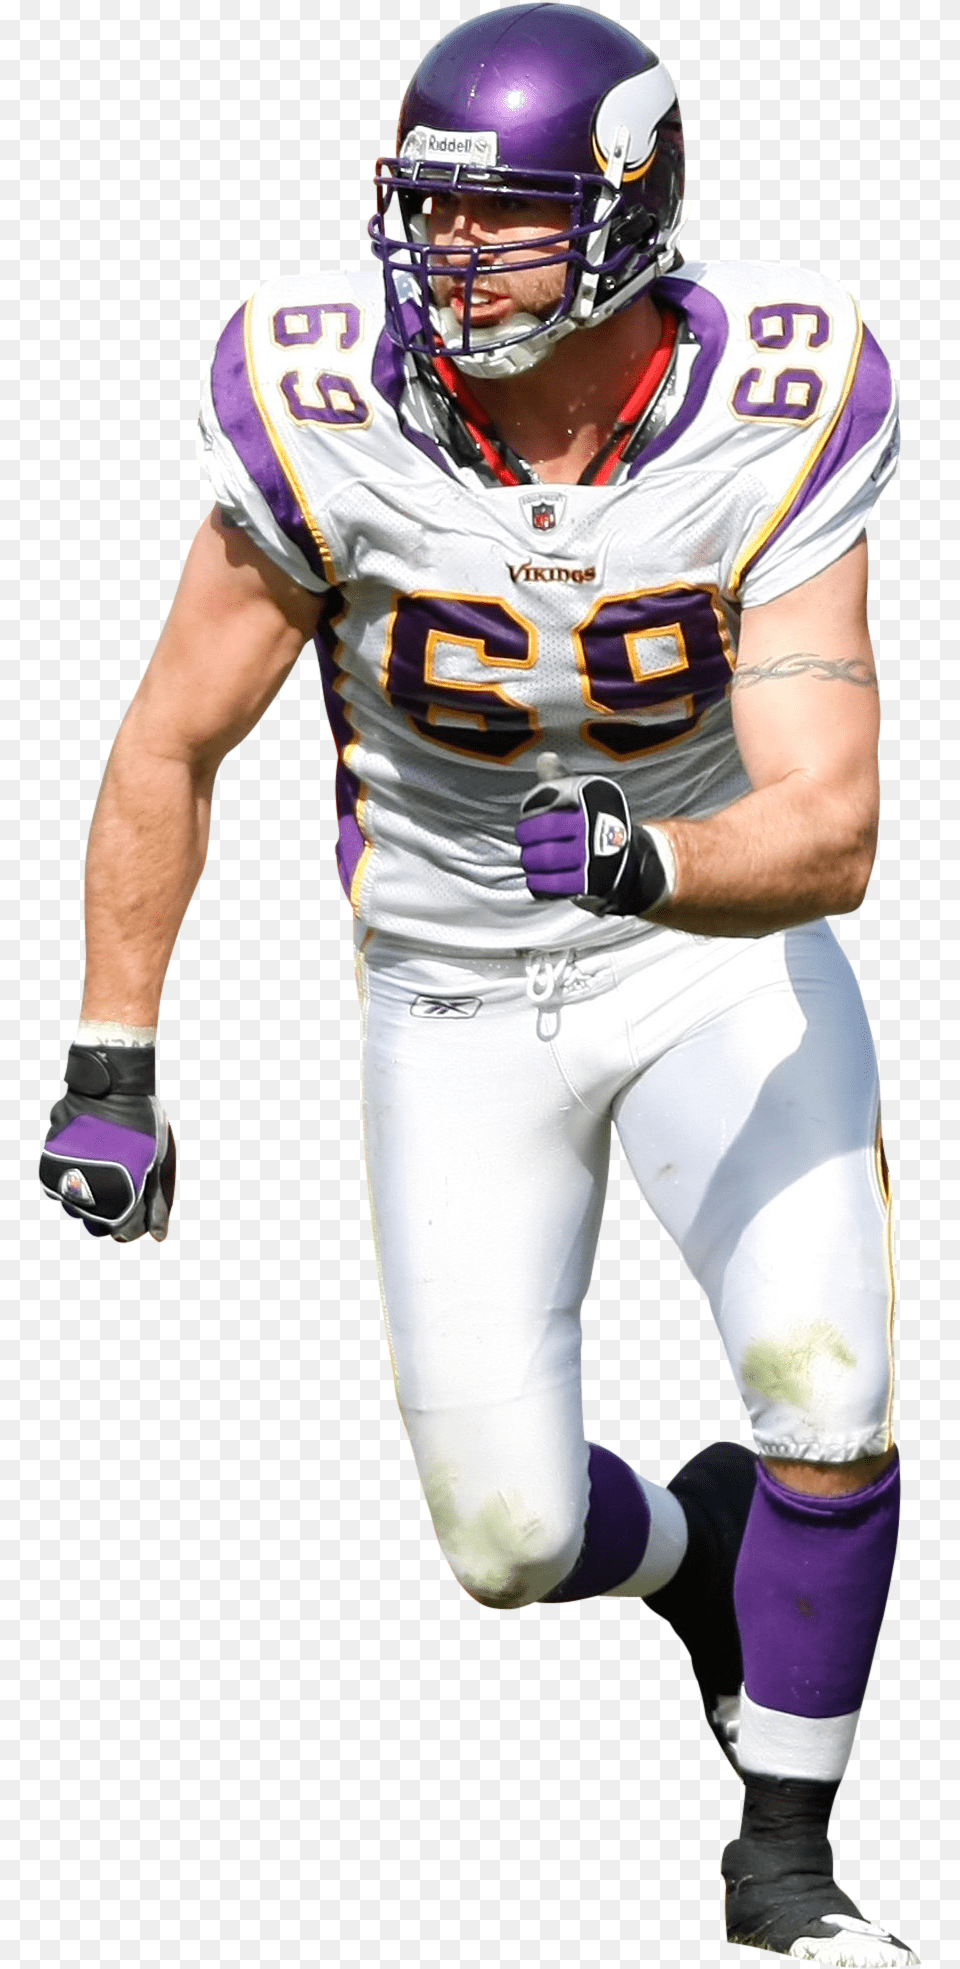 Nfl Hd Hdpng Images Pluspng American Football Player, Sport, American Football, Football Helmet, Helmet Free Png Download